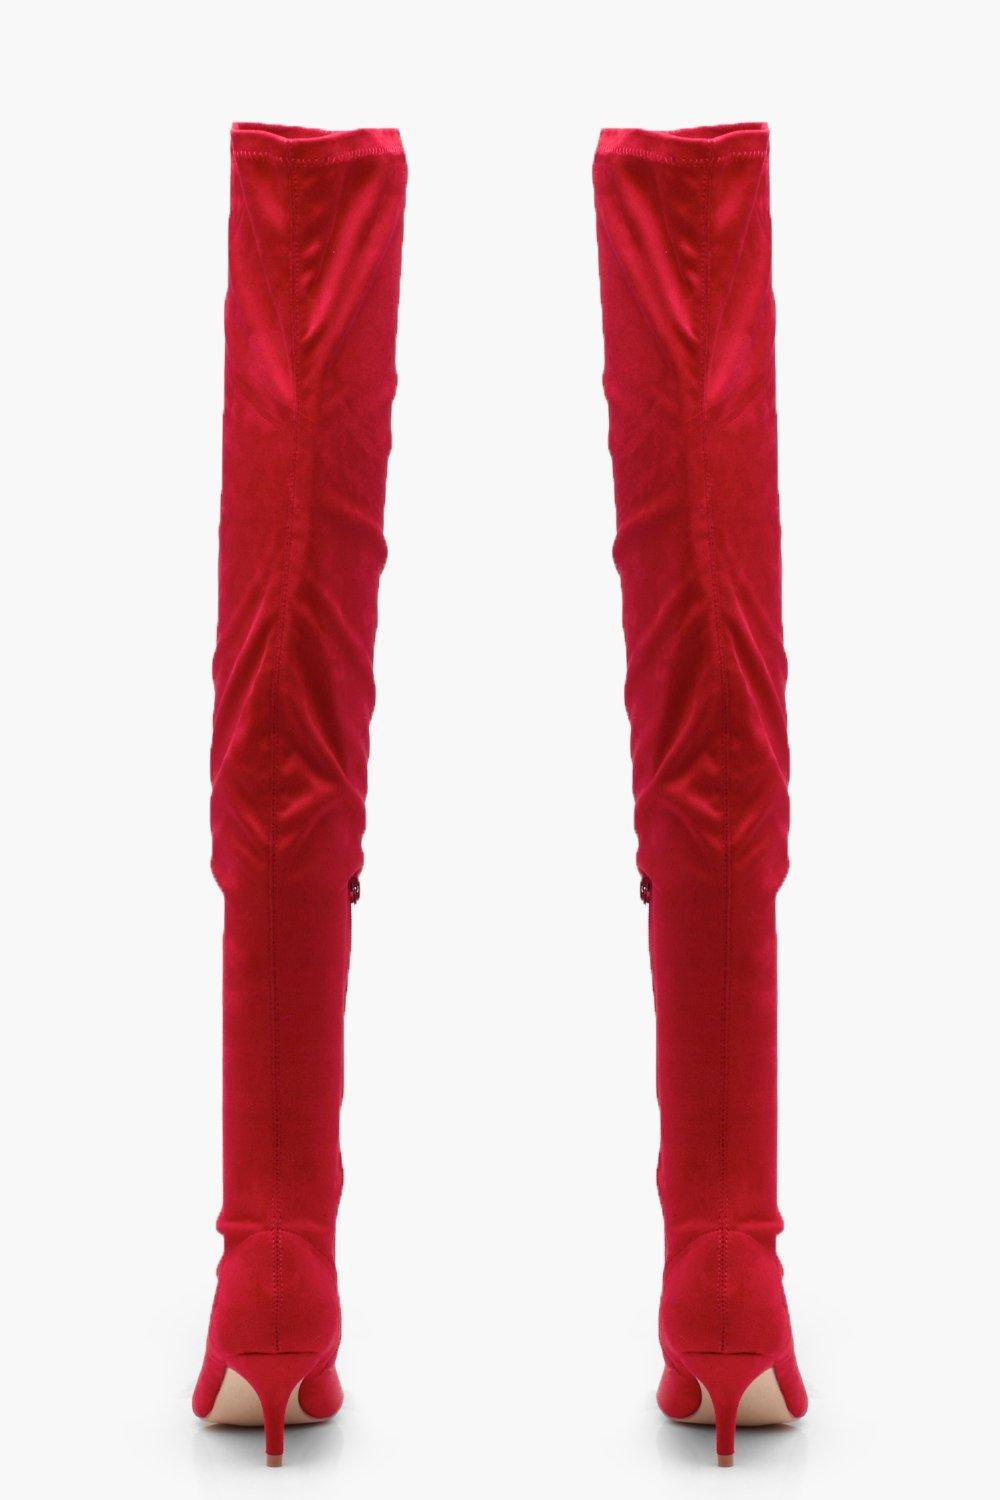 Boohoo Jessica Pointed Kitten Heel Over The Knee Boot in Red | Lyst